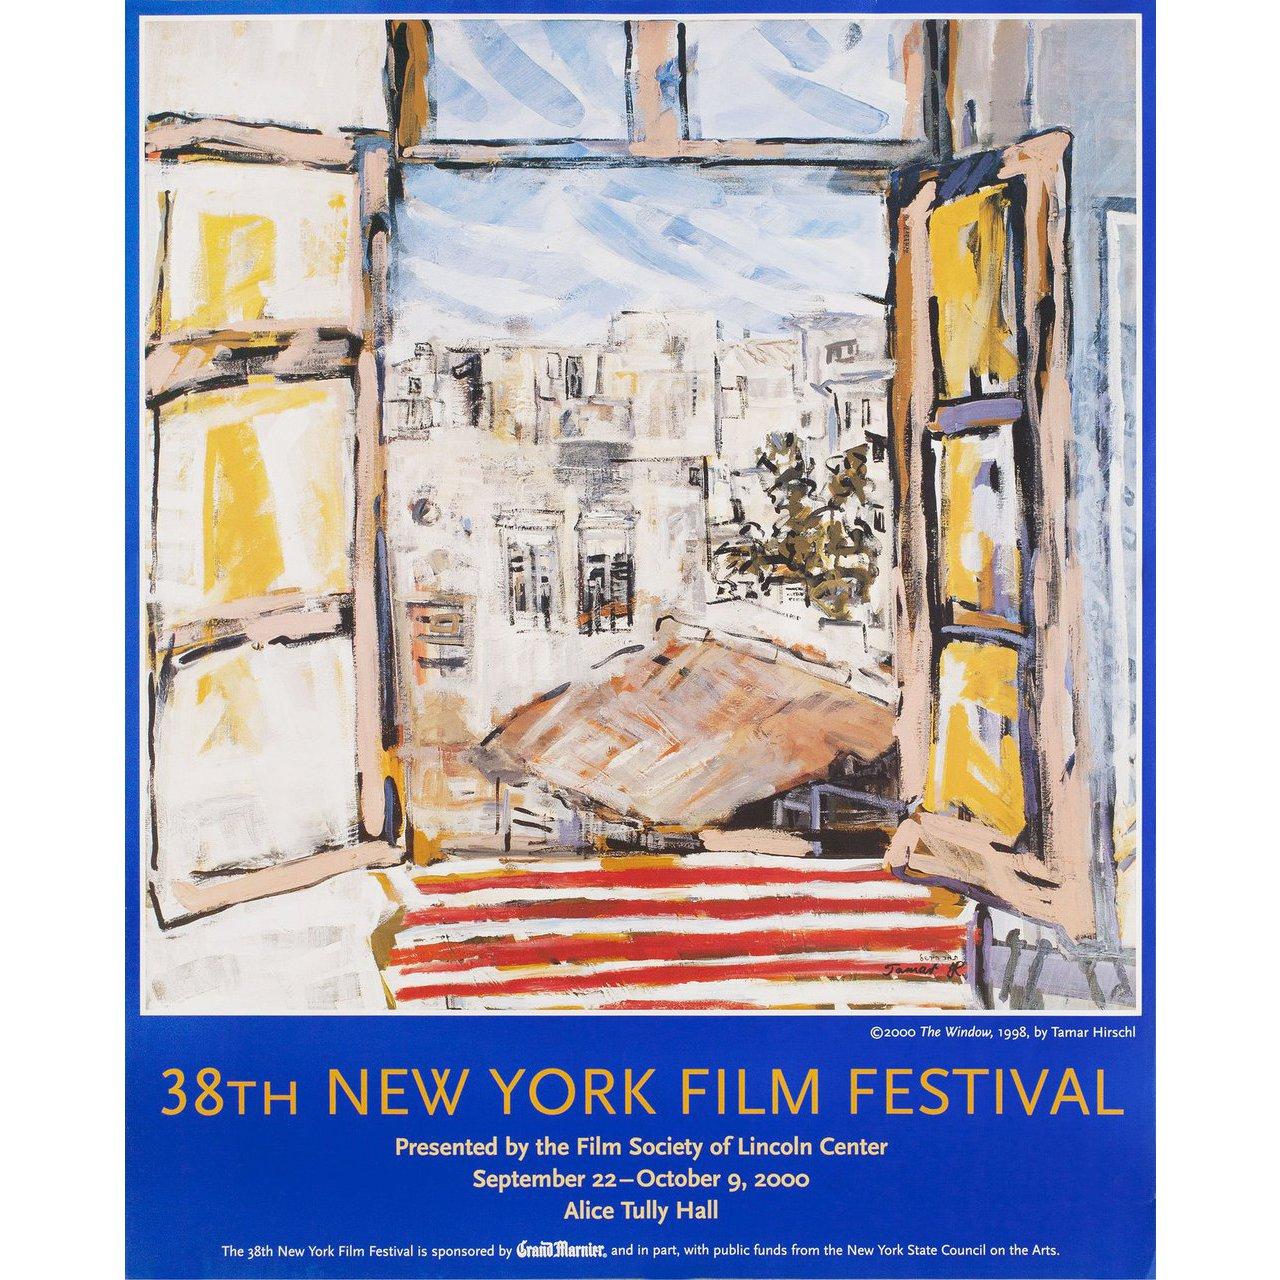 Original 2000 U.S. poster by Tamar Hirschl for the 1963 festival New York Film Festival. Very good fine condition, rolled. Please note: the size is stated in inches and the actual size can vary by an inch or more.
  